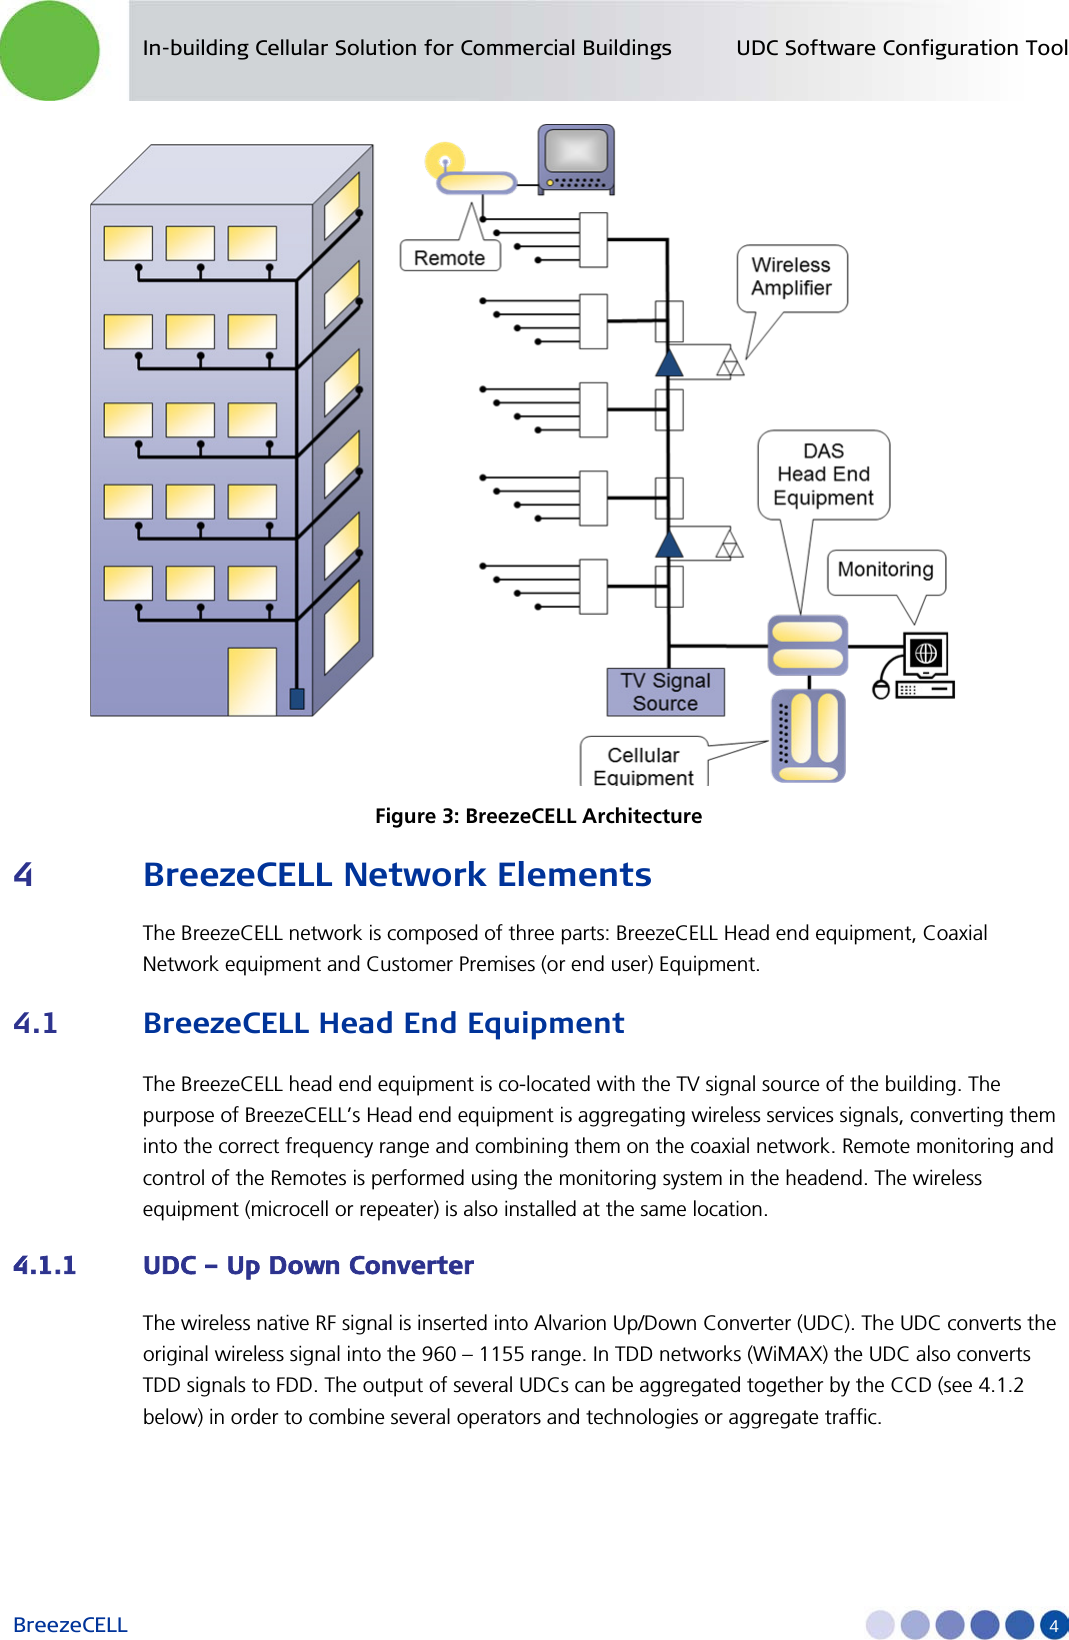 In-building Cellular Solution for Commercial Buildings UDC Software Configuration Tool BreezeCELL     4  Figure 3: BreezeCELL Architecture 4 BreezeCELL Network Elements The BreezeCELL network is composed of three parts: BreezeCELL Head end equipment, Coaxial Network equipment and Customer Premises (or end user) Equipment. 4.1 BreezeCELL Head End Equipment The BreezeCELL head end equipment is co-located with the TV signal source of the building. The purpose of BreezeCELL’s Head end equipment is aggregating wireless services signals, converting them into the correct frequency range and combining them on the coaxial network. Remote monitoring and control of the Remotes is performed using the monitoring system in the headend. The wireless equipment (microcell or repeater) is also installed at the same location. 4.1.1 UDC – Up Down Converter The wireless native RF signal is inserted into Alvarion Up/Down Converter (UDC). The UDC converts the original wireless signal into the 960 – 1155 range. In TDD networks (WiMAX) the UDC also converts TDD signals to FDD. The output of several UDCs can be aggregated together by the CCD (see  4.1.2 below) in order to combine several operators and technologies or aggregate traffic.  